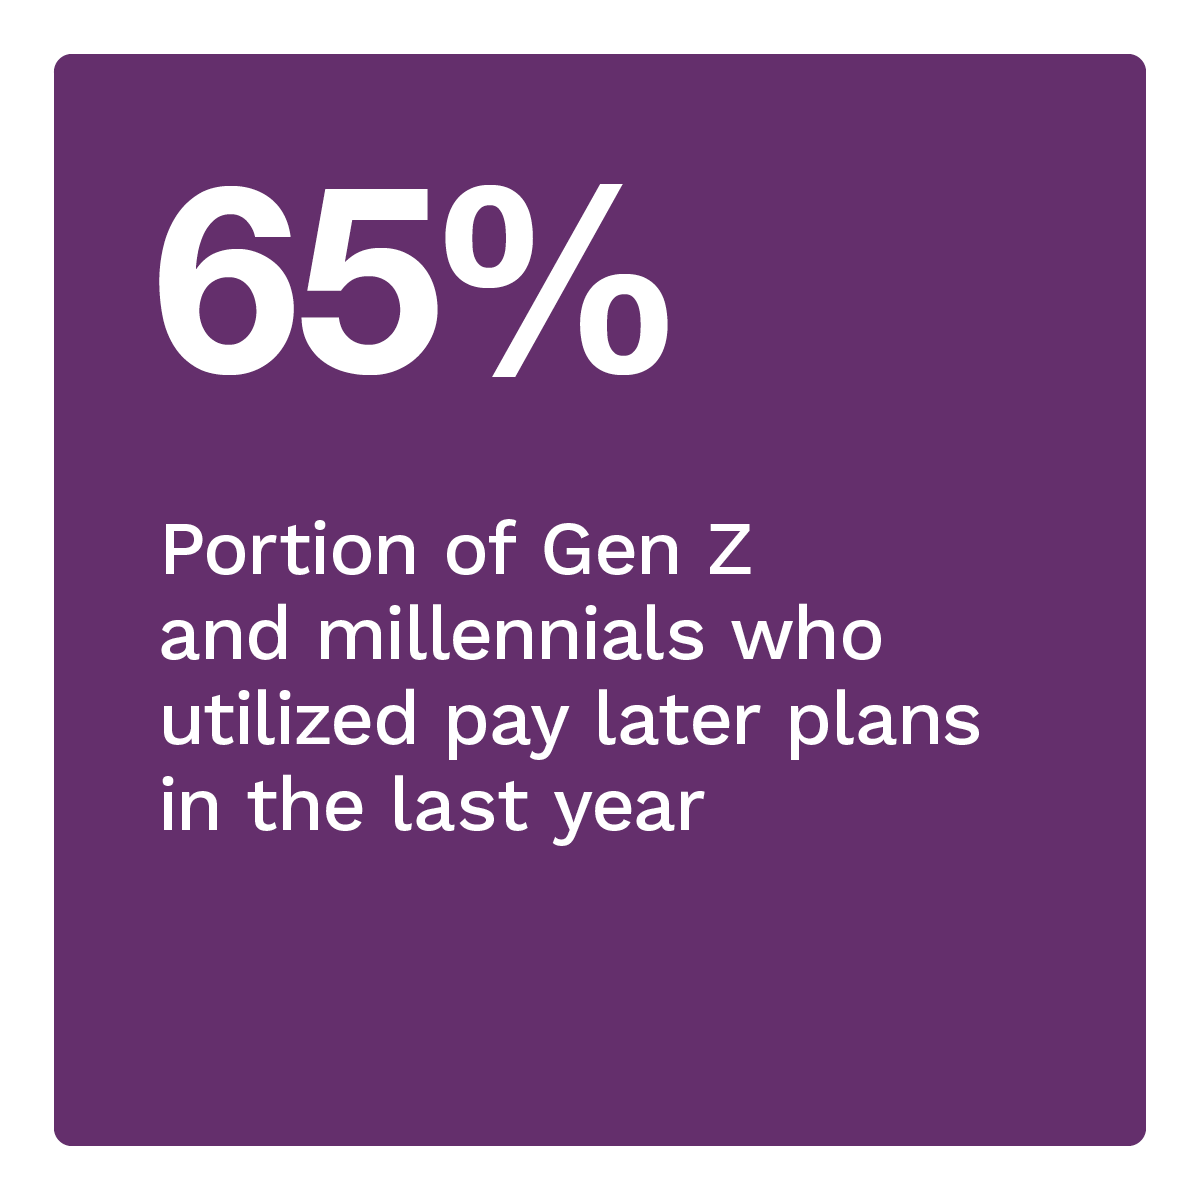 65%: Portion of Gen Z and millennials who utilized pay later plans in the last year